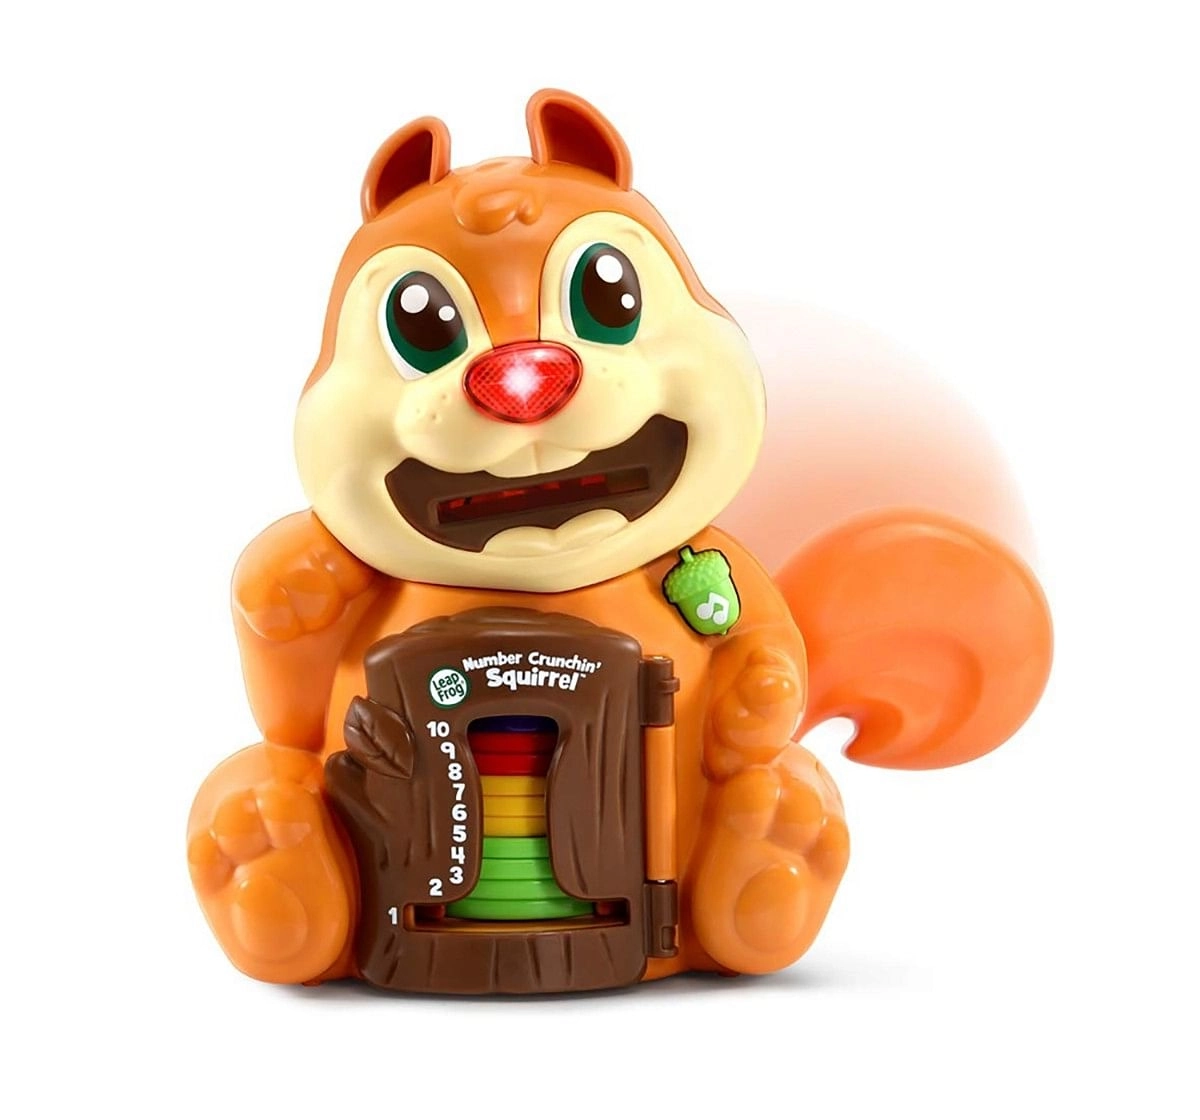 Leap Frog  Number Crunchin Squirrel Learning Toys for Kids age 2Y+ (Brown)